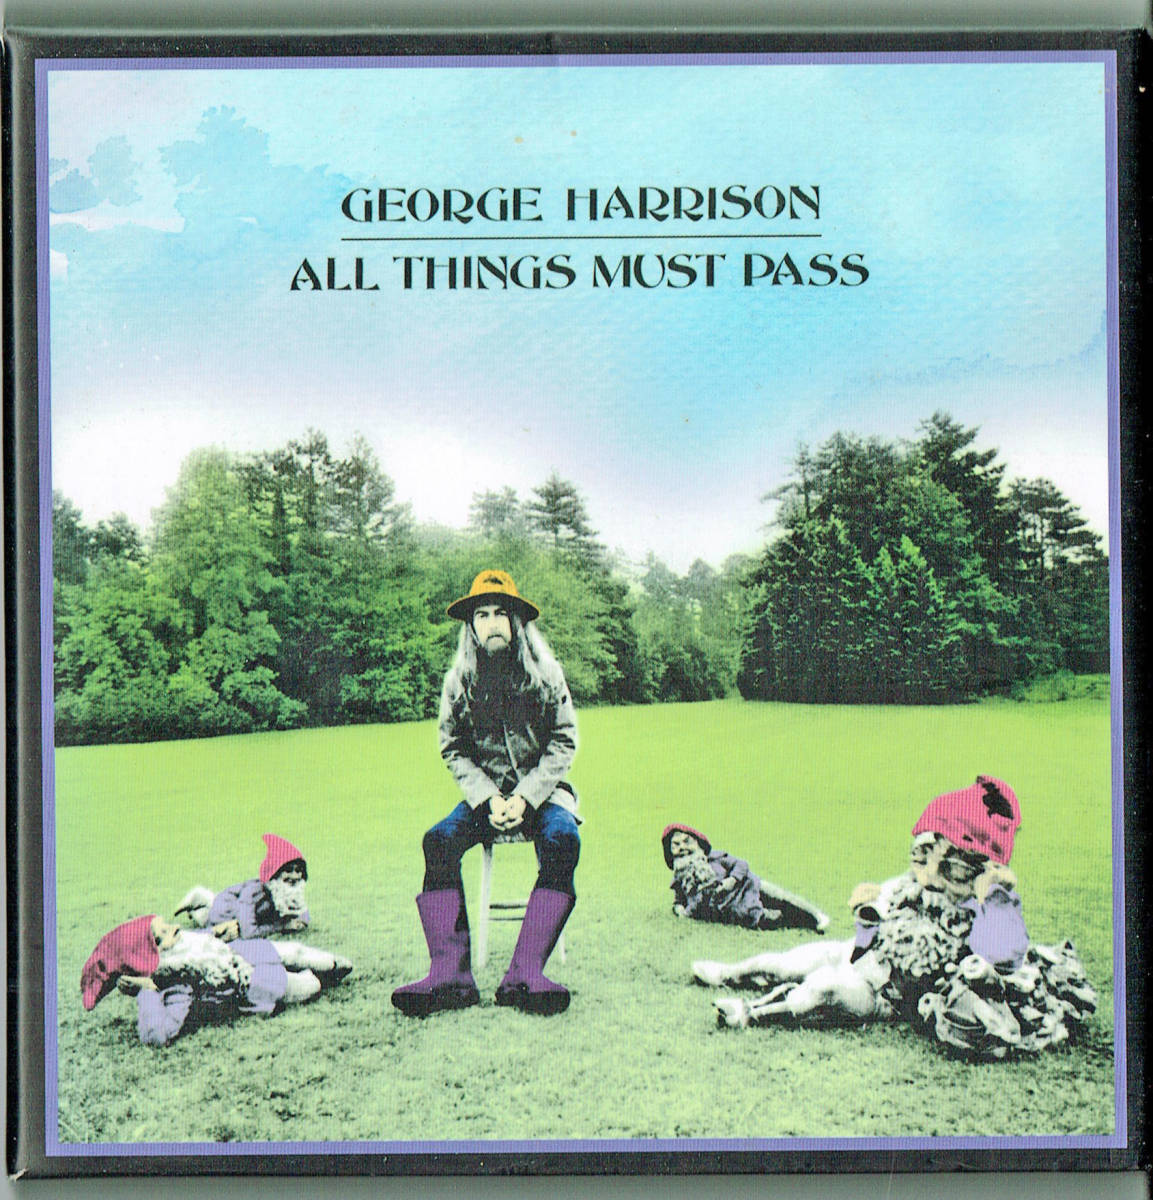 GEORGE HARRISON/ALL THINGS MUST PASS/TOSHIBA AP-9016C JChere雅虎拍卖代购